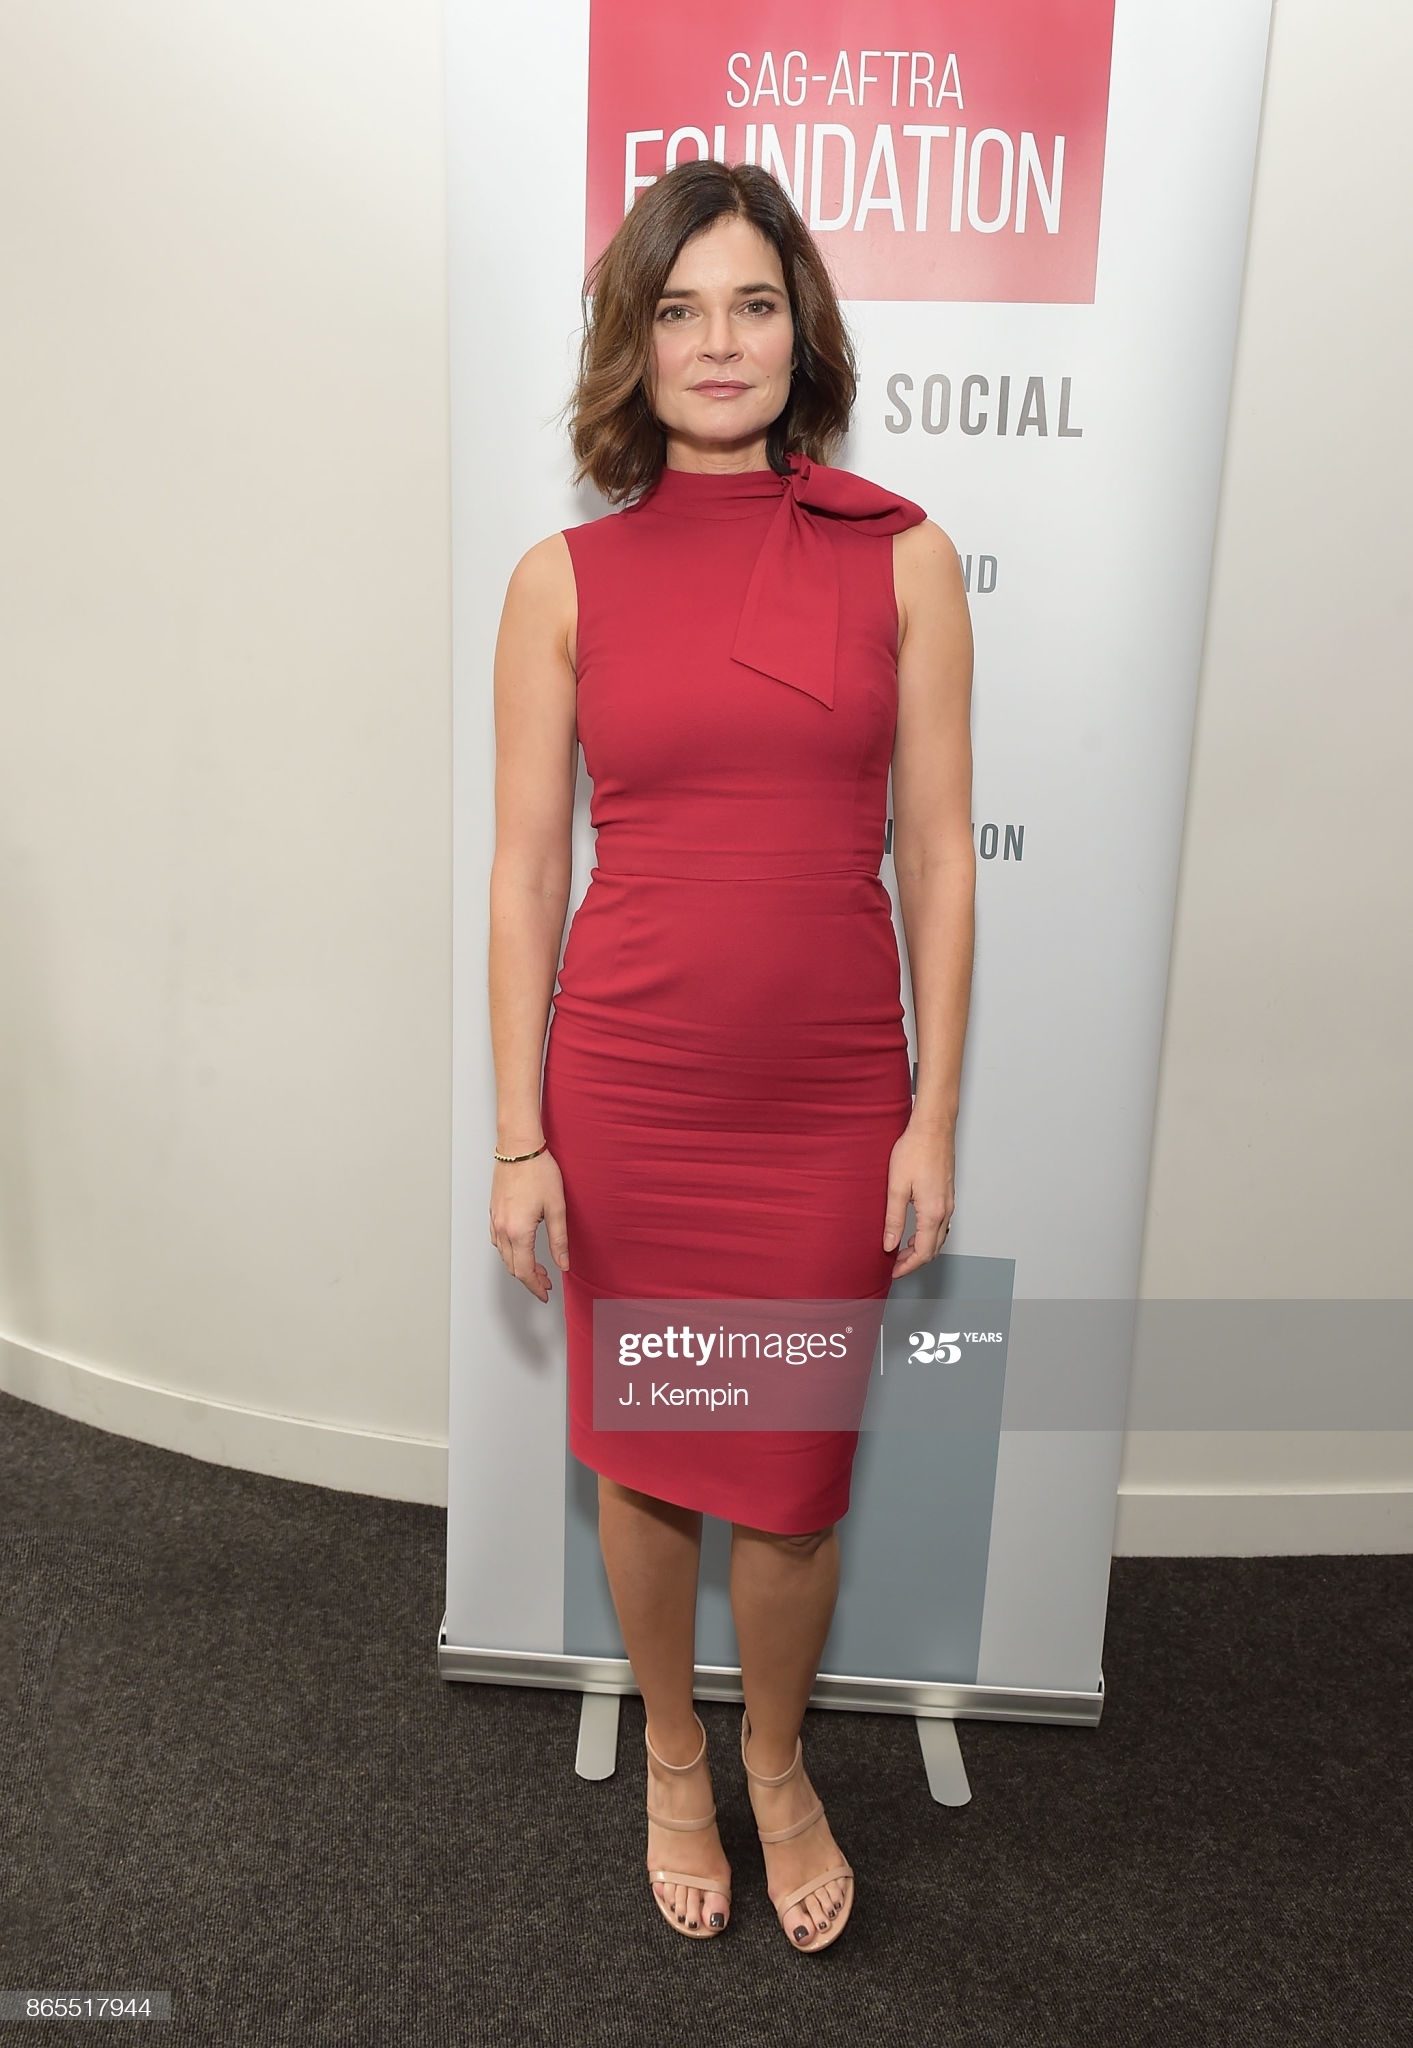 Betsy brandt young